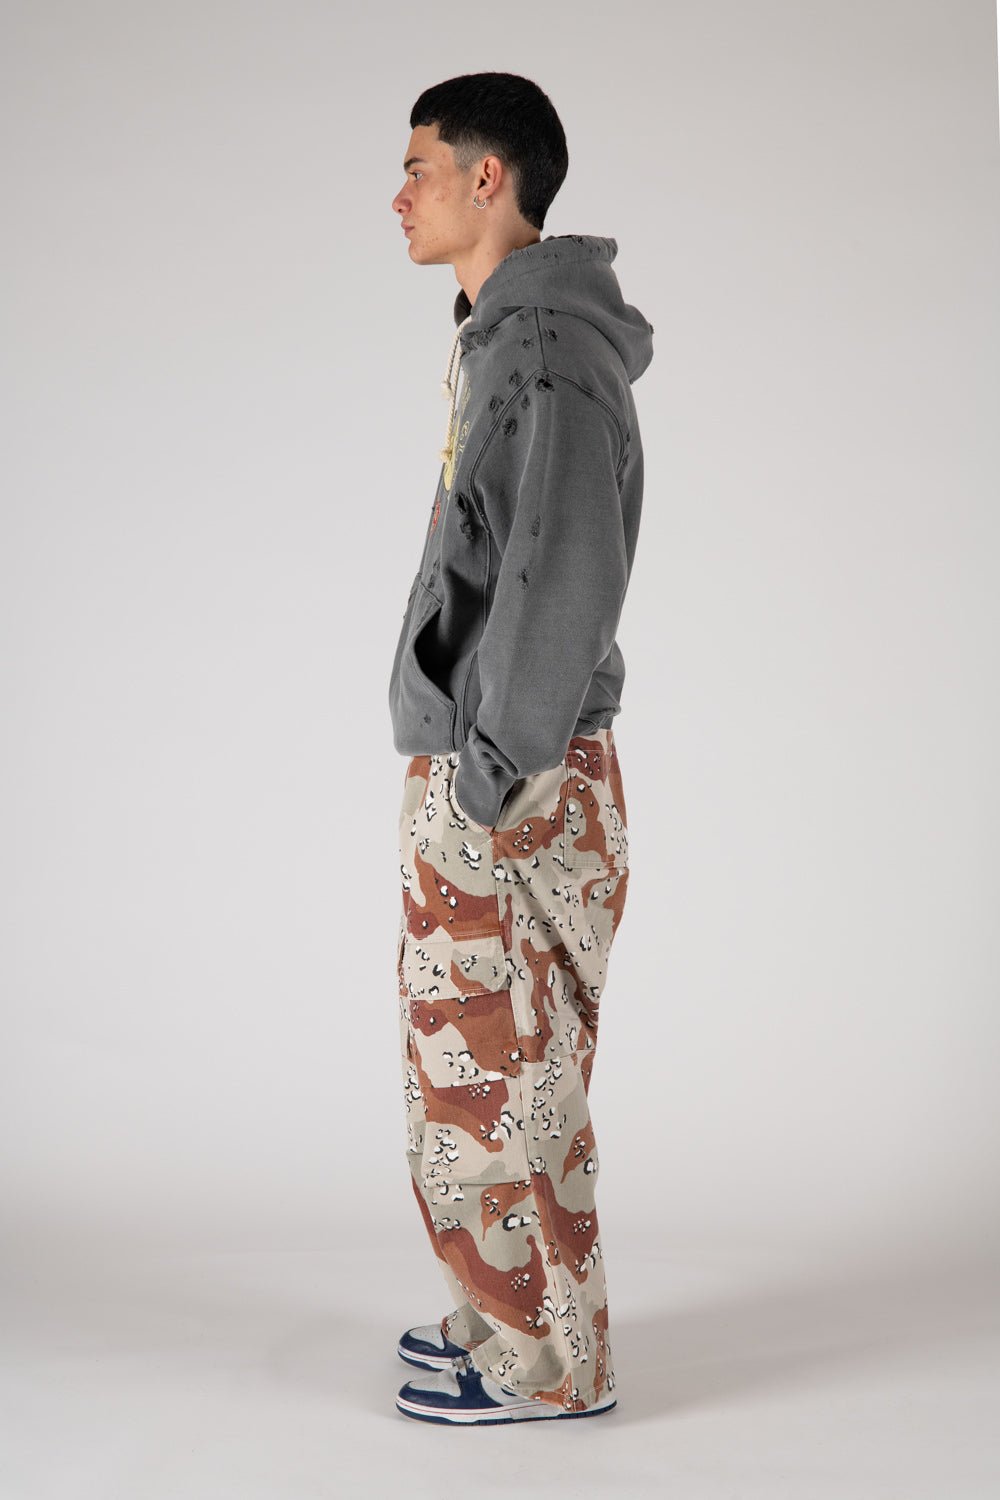 SK8 - CAMO Camouflage skater pants with front button and zip closure. Back leather logo patch. Five pockets. Composition: 100% Cotton HTC LOS ANGELES